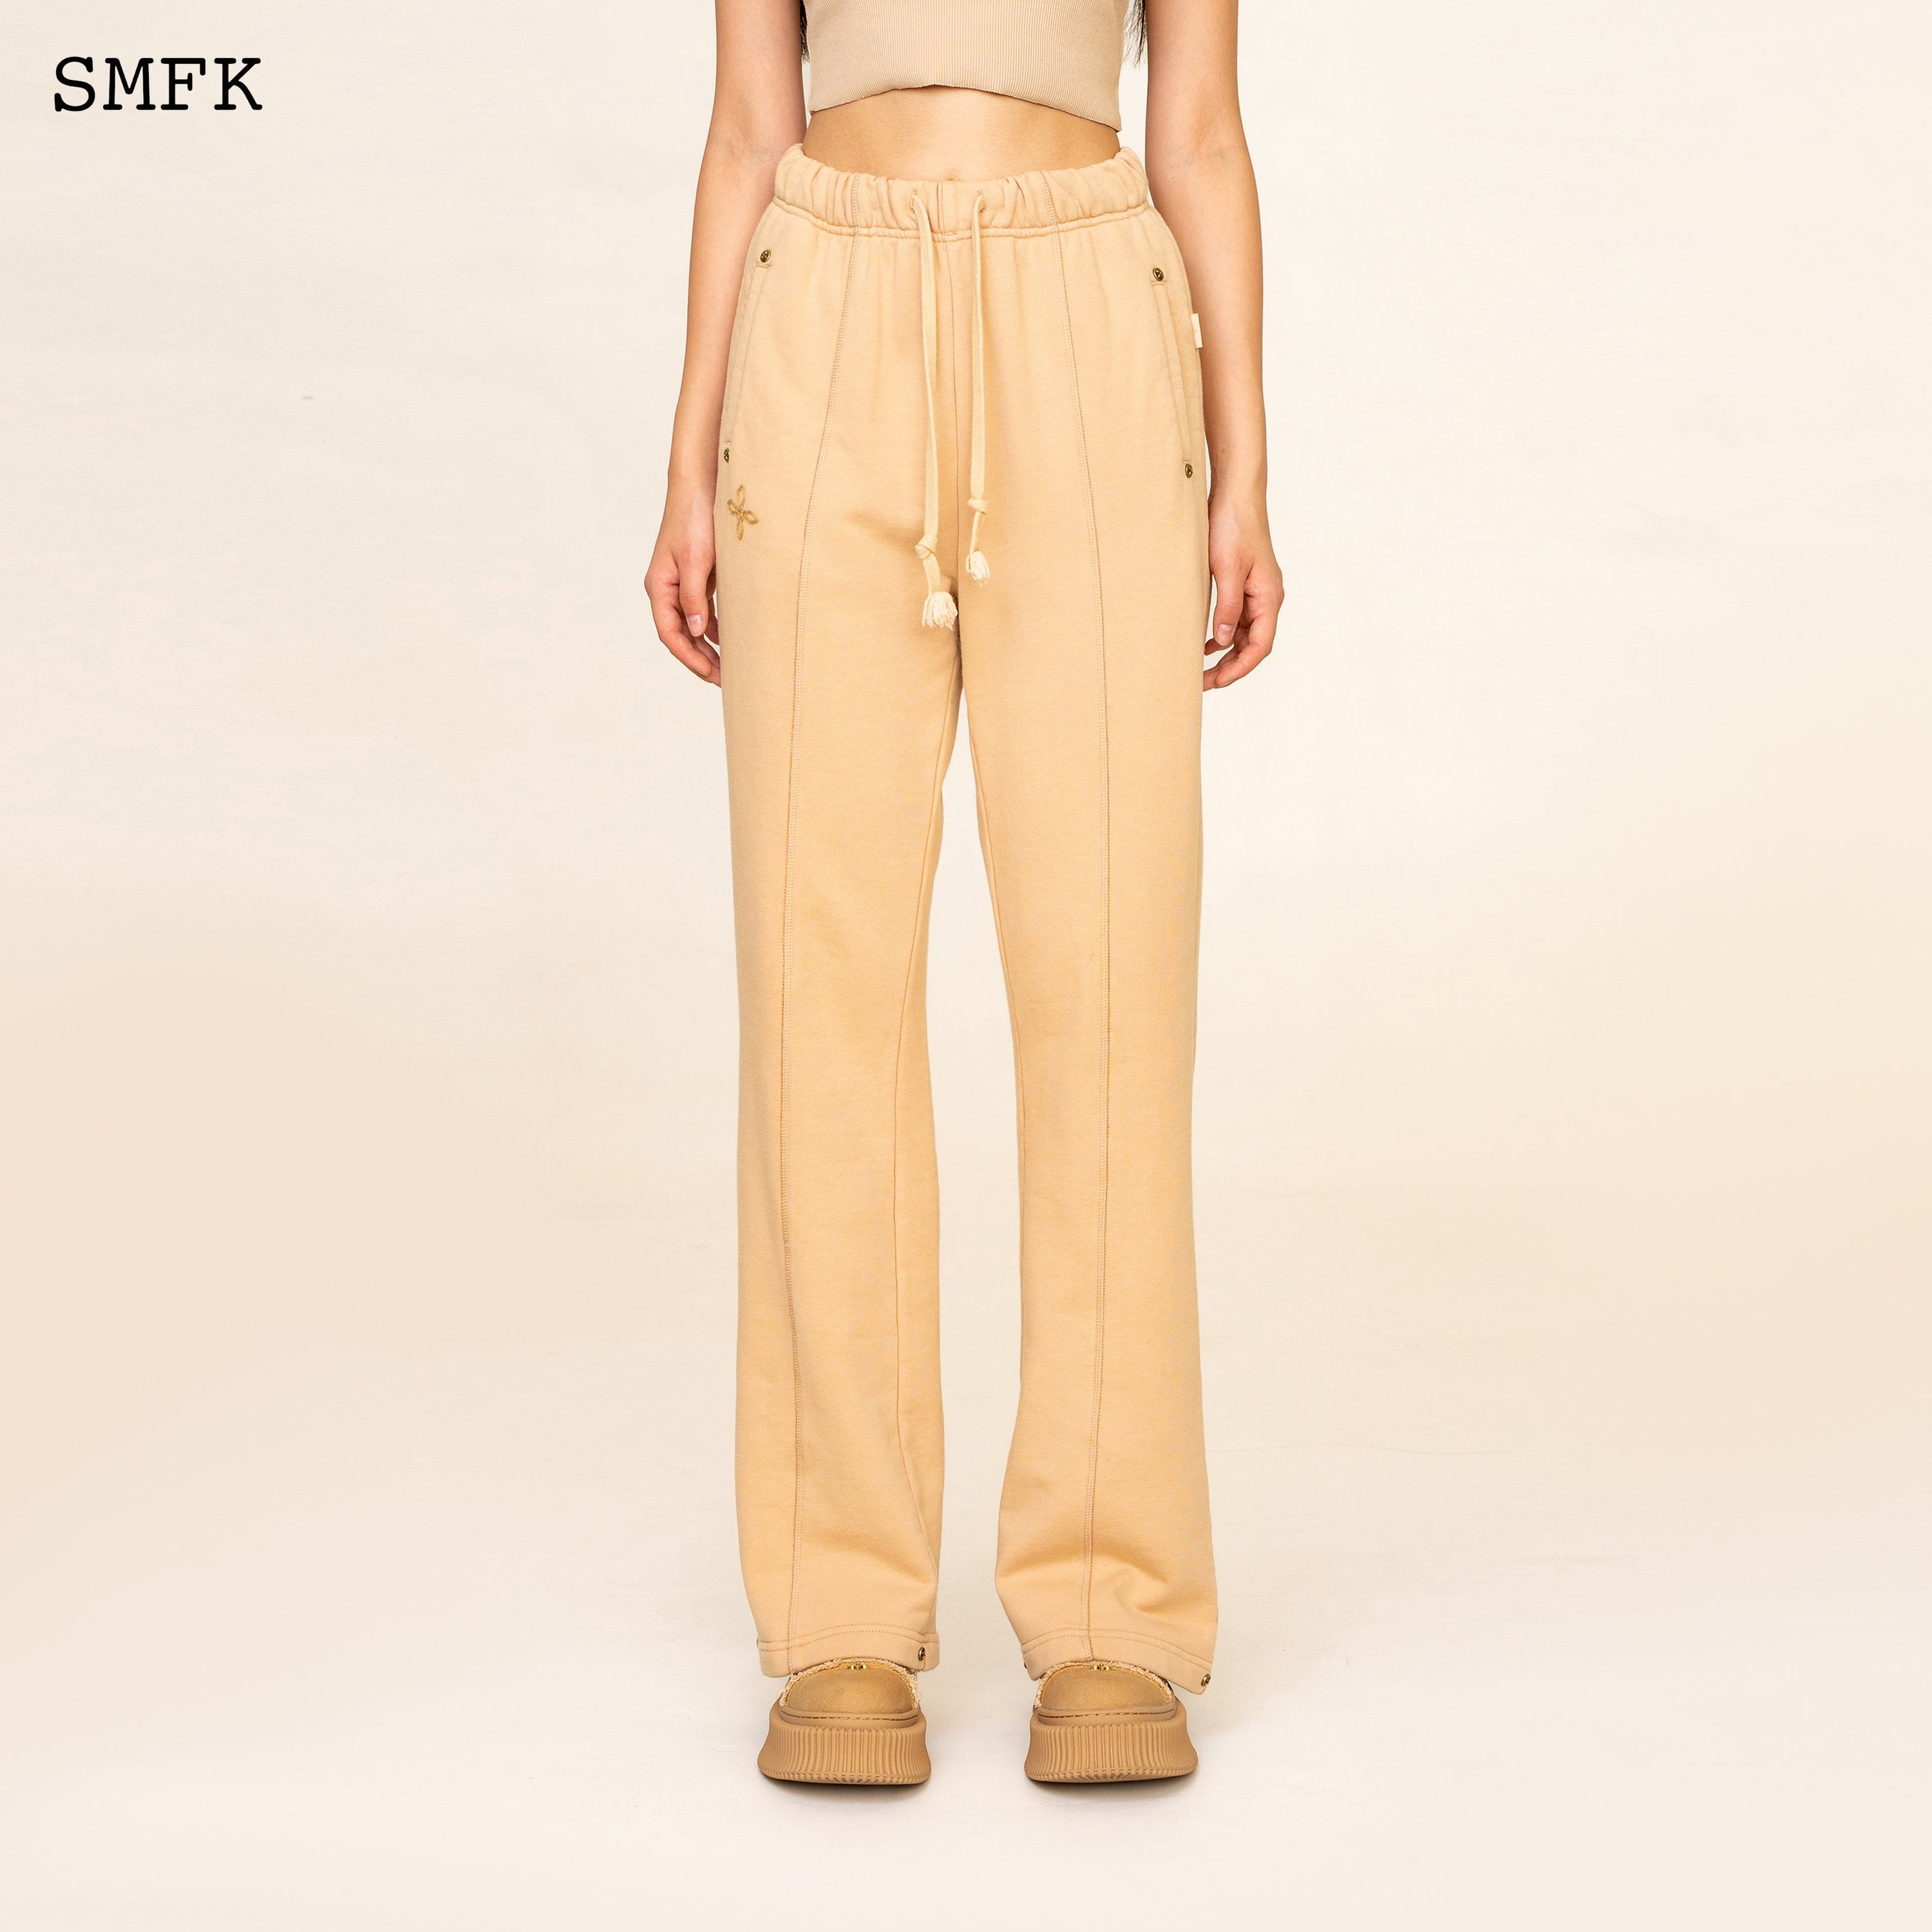 Compass Classic Cross Flared Sweatpants In Wheat - SMFK Official